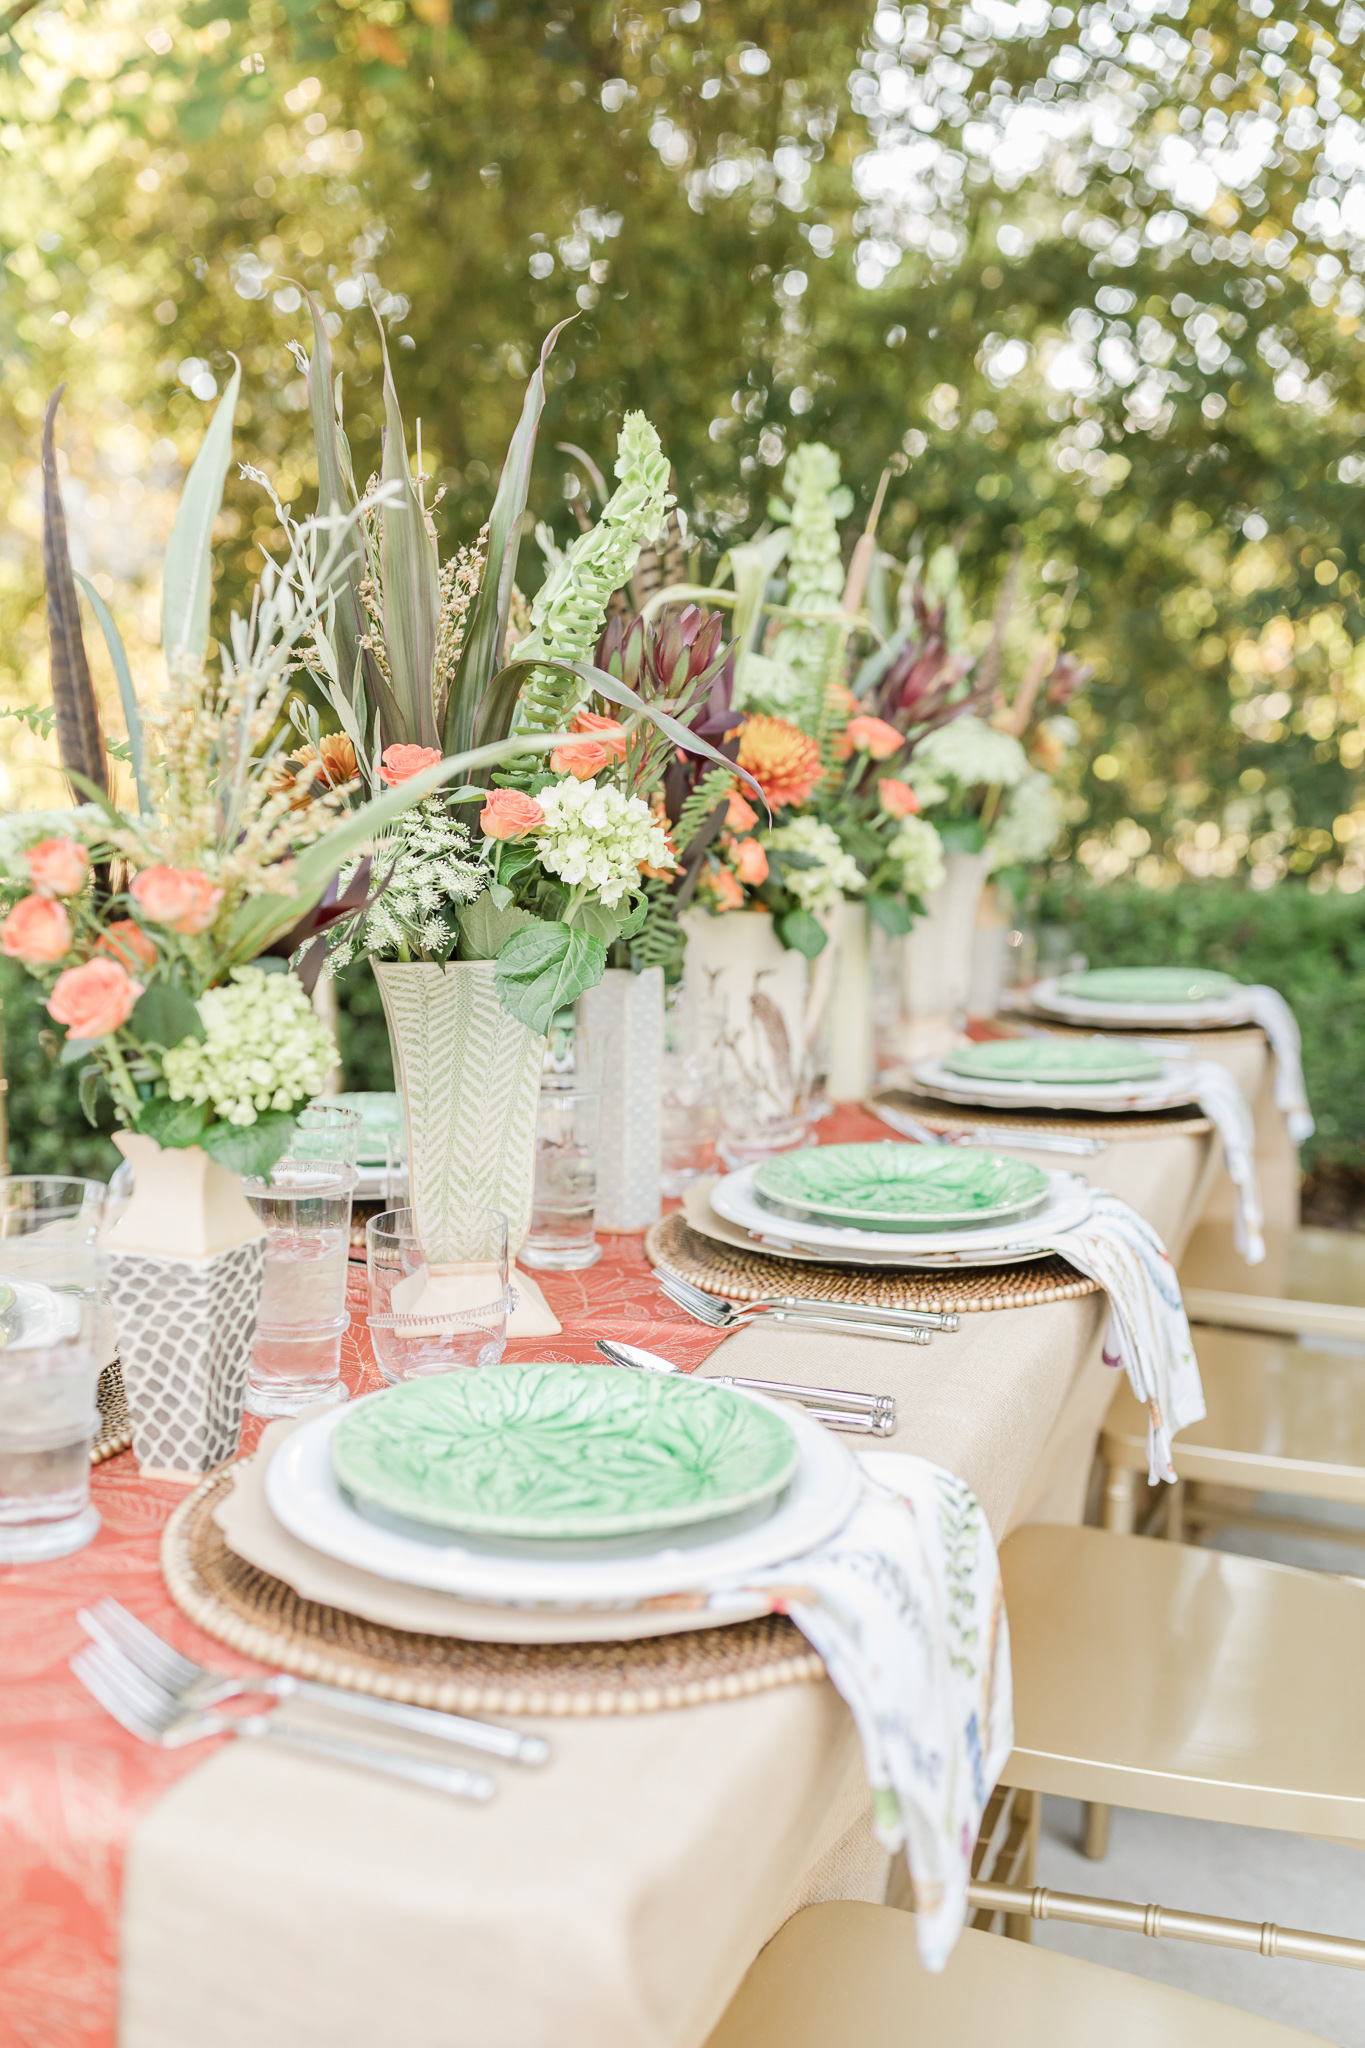 A fall table featuring china with green plates and a row of vases holding fall flowers.